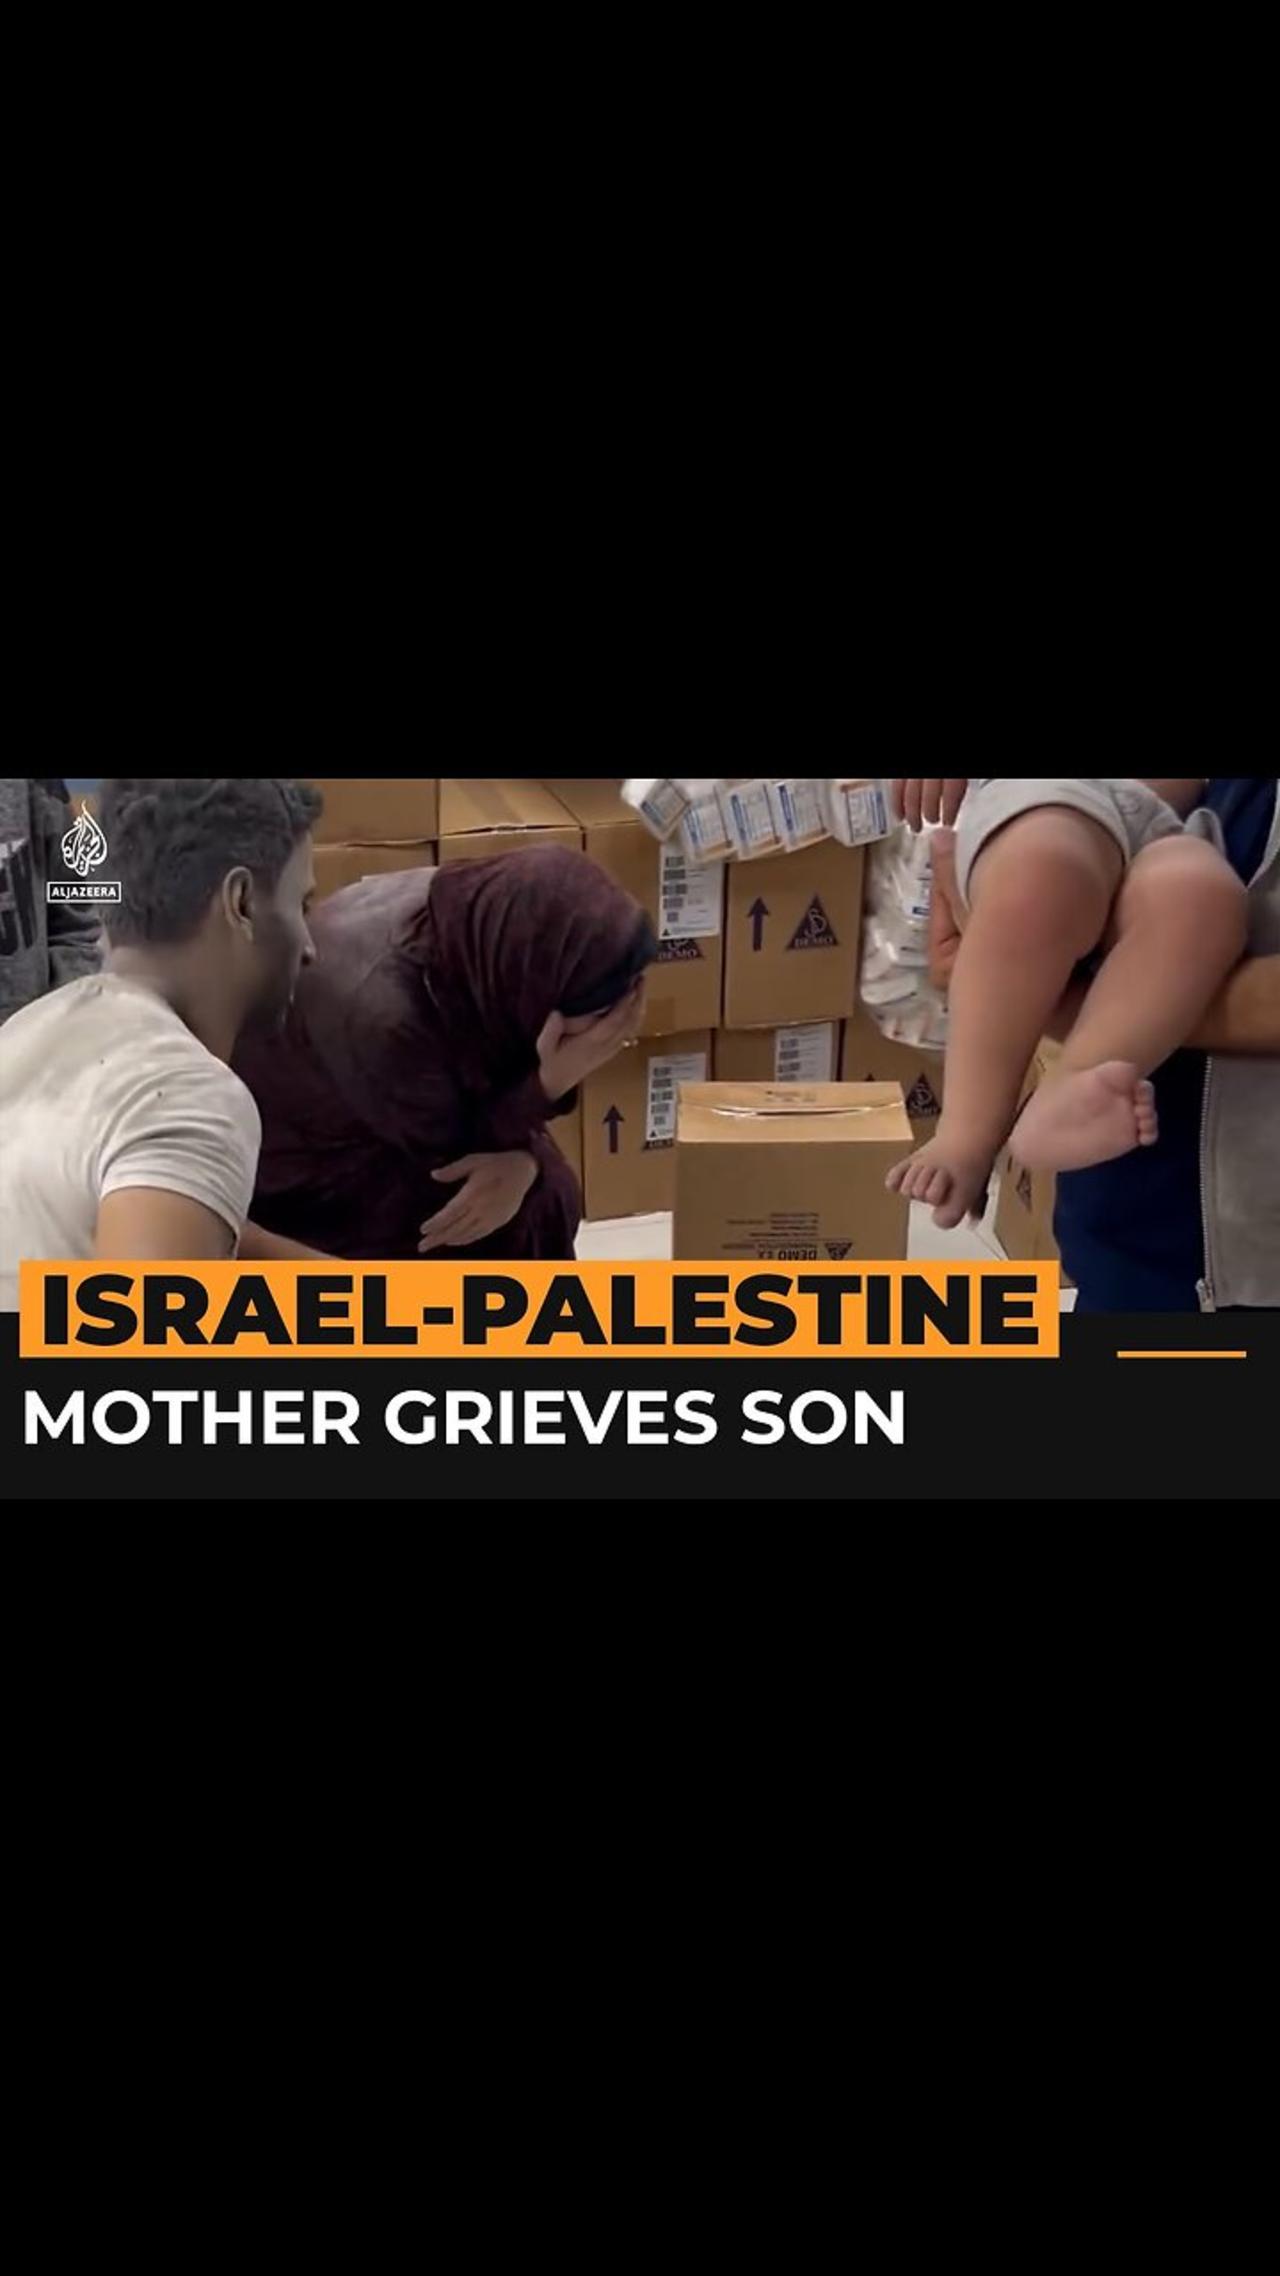 Raw grief of a mother losing her son in Gaza - Al Jazeera Newsfeed